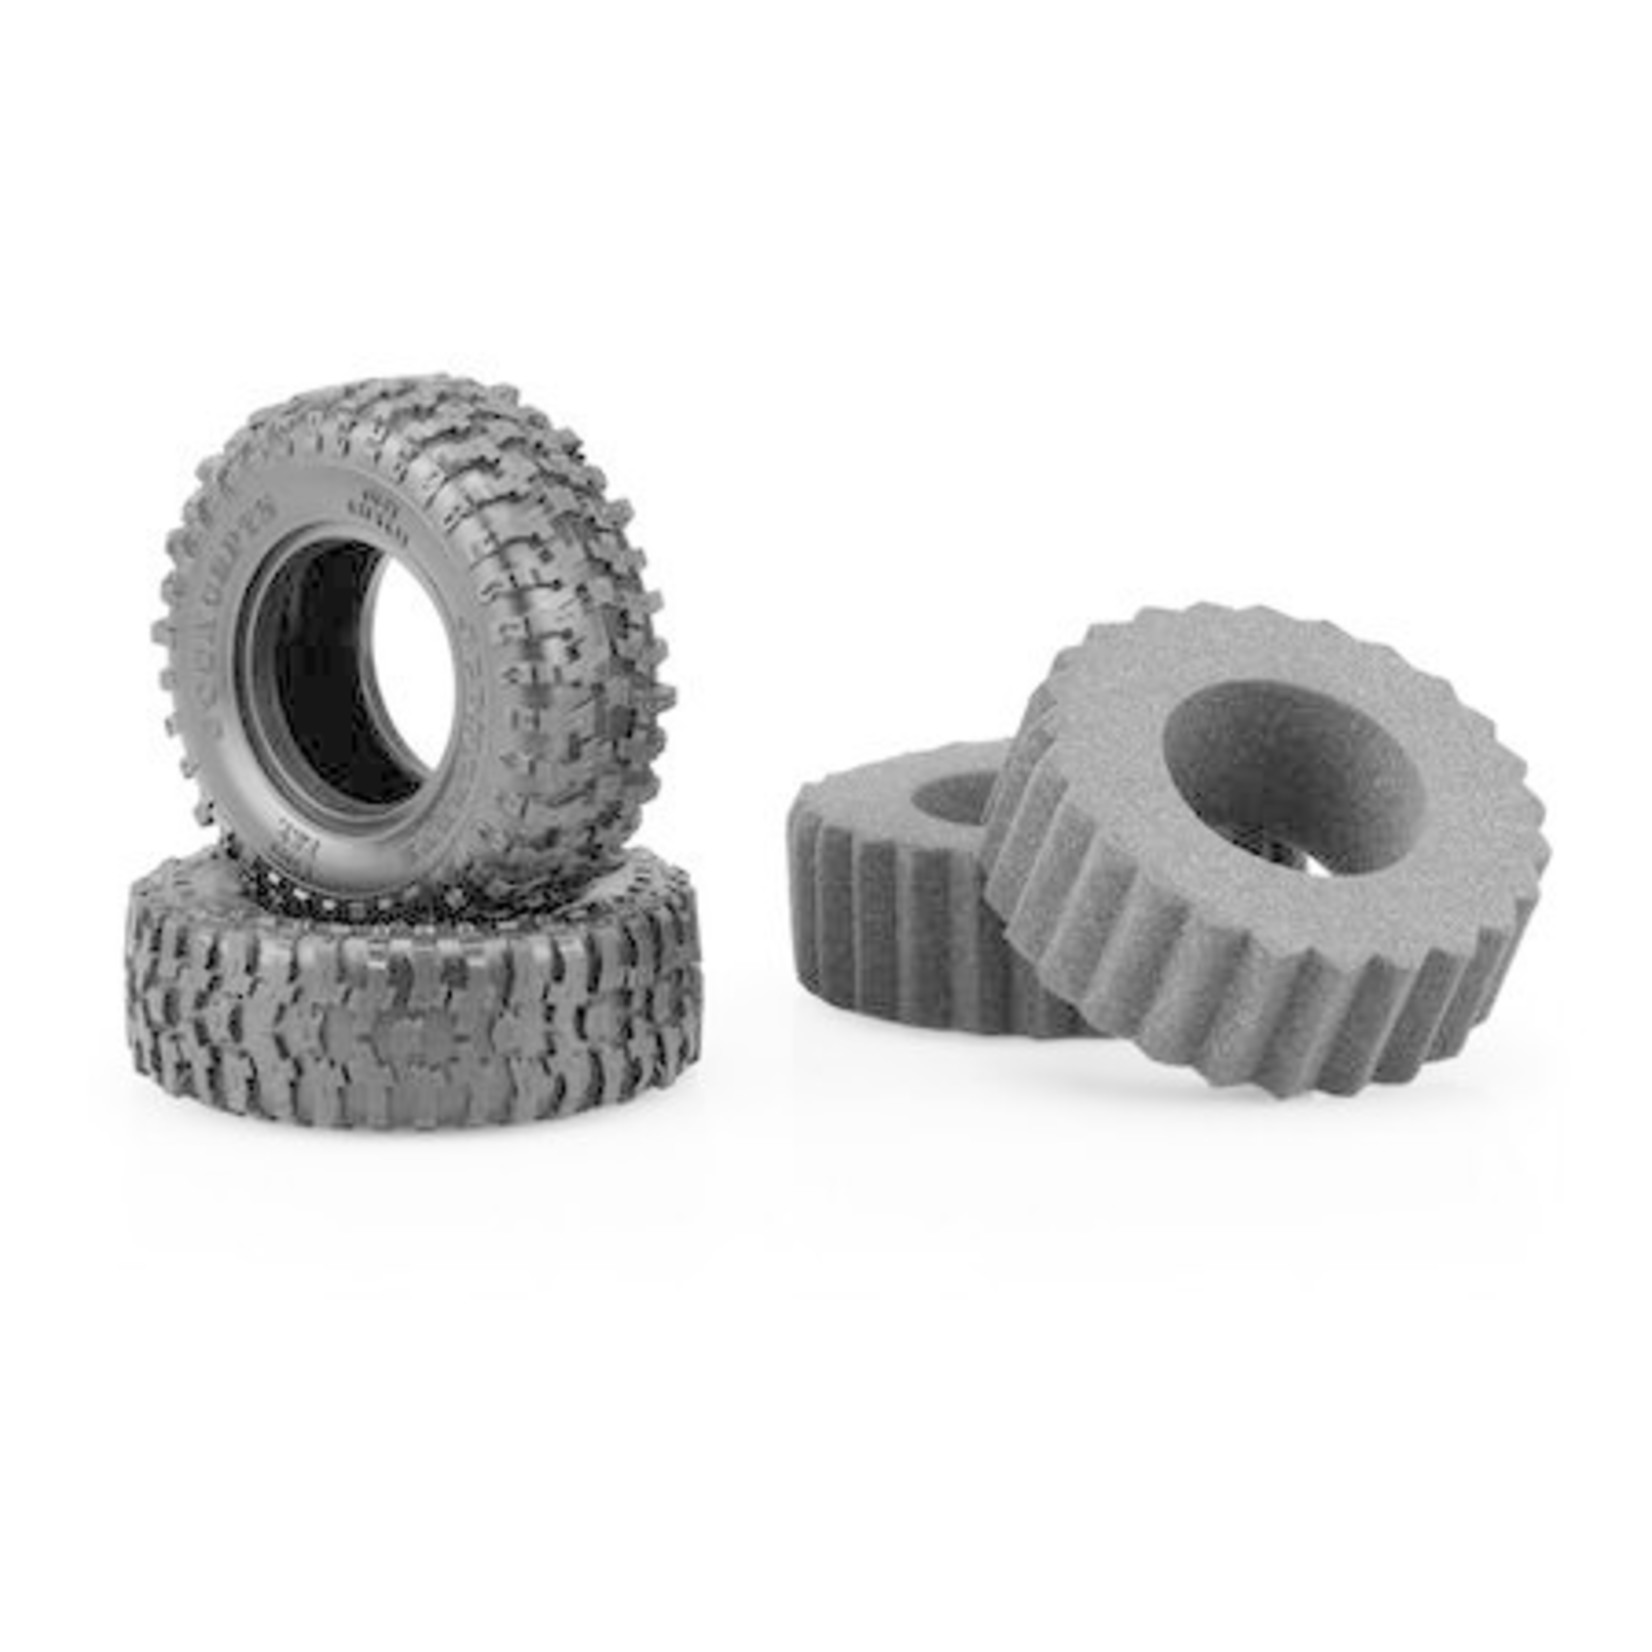 J Concepts 1.9 Tusk - Green Compound, Scale Country Tires (3.93" OD)